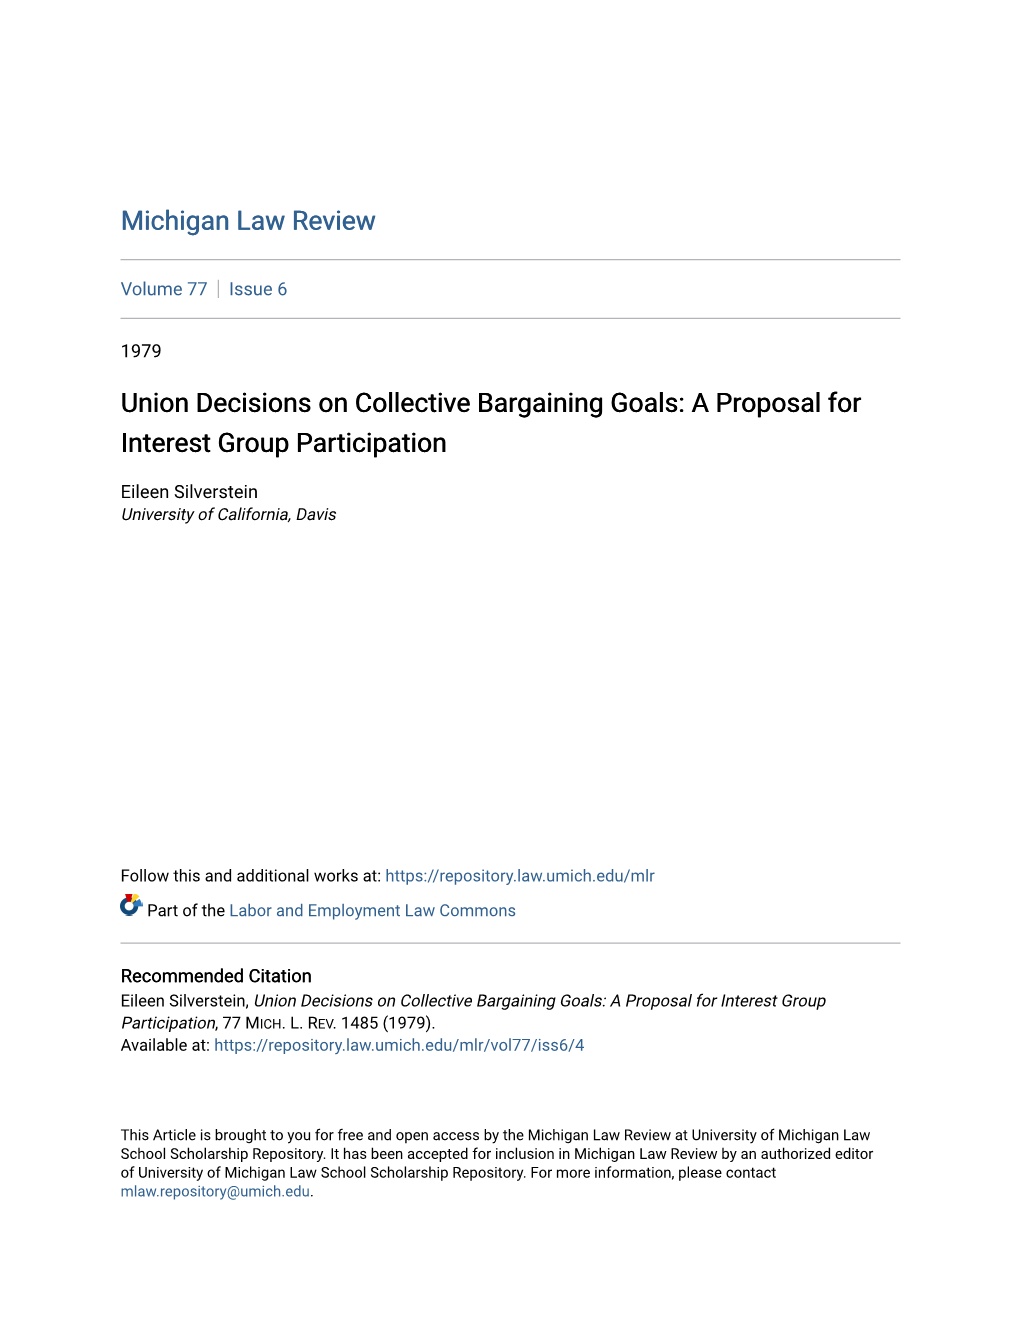 Union Decisions on Collective Bargaining Goals: a Proposal for Interest Group Participation